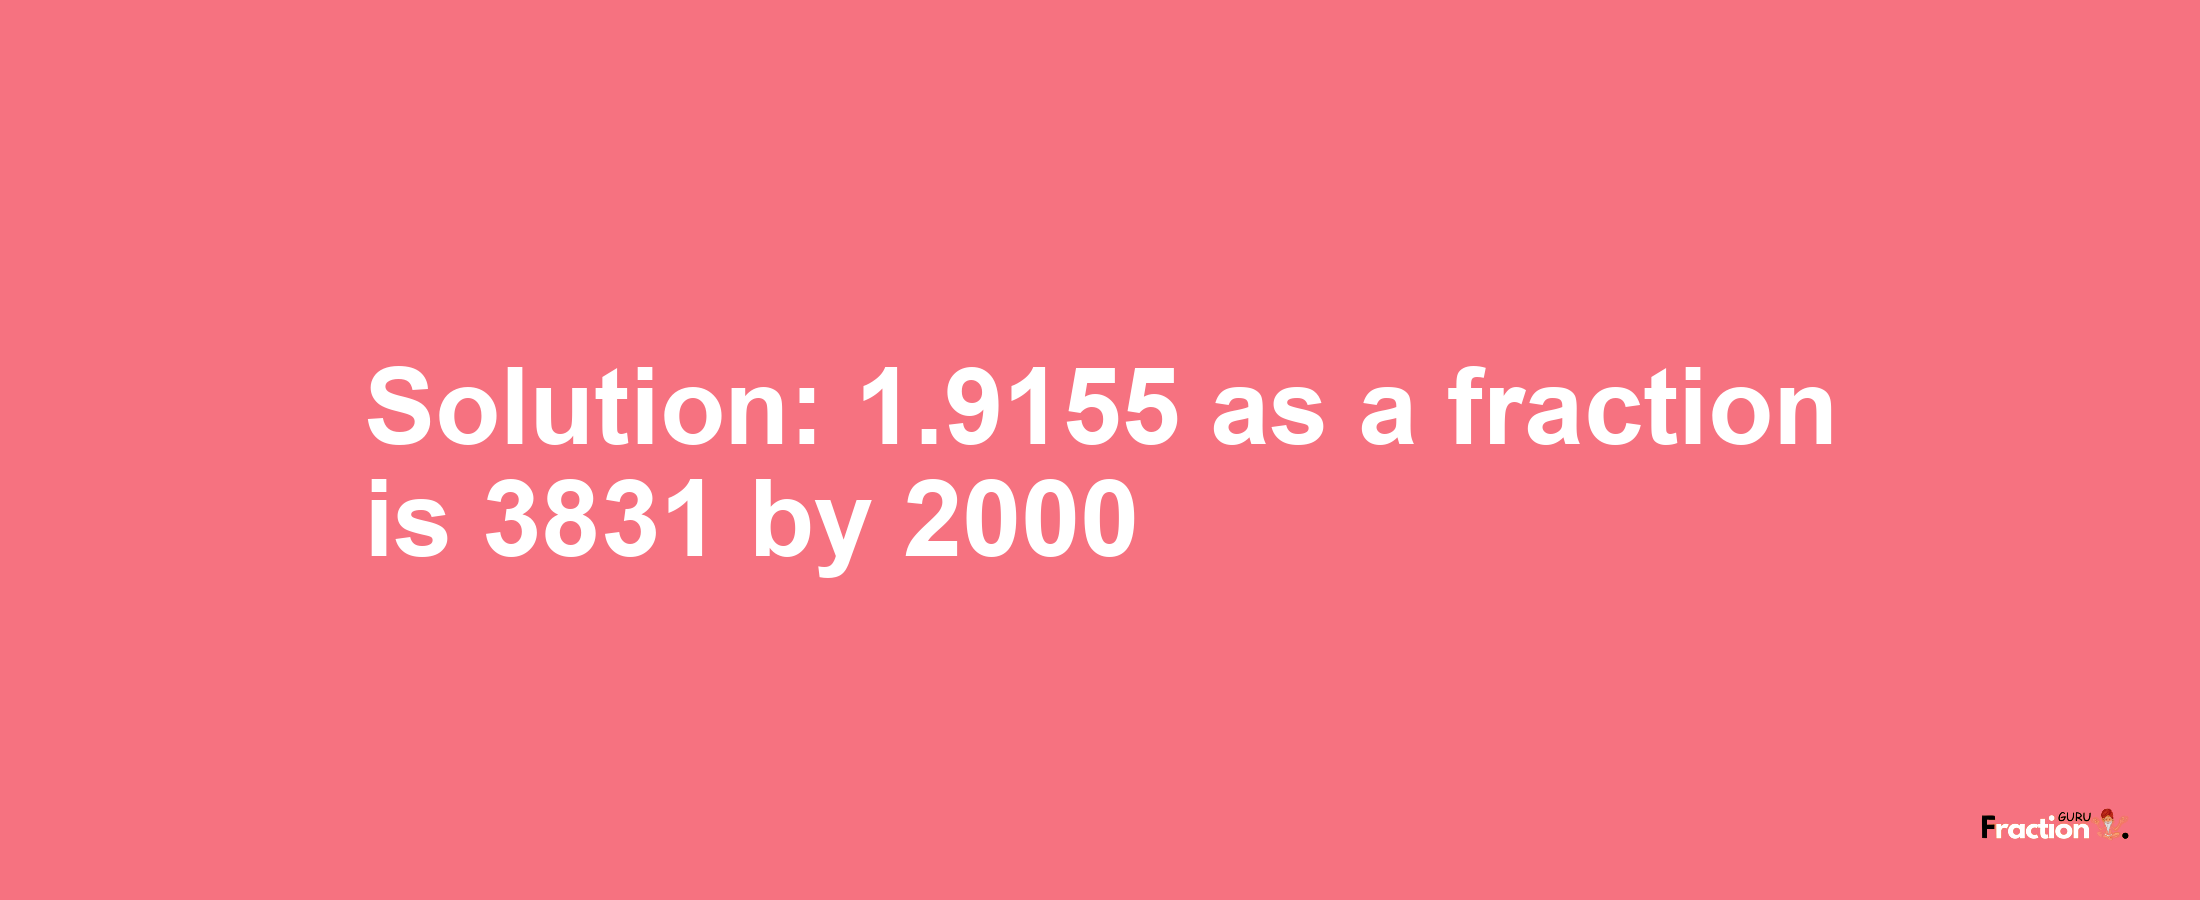 Solution:1.9155 as a fraction is 3831/2000